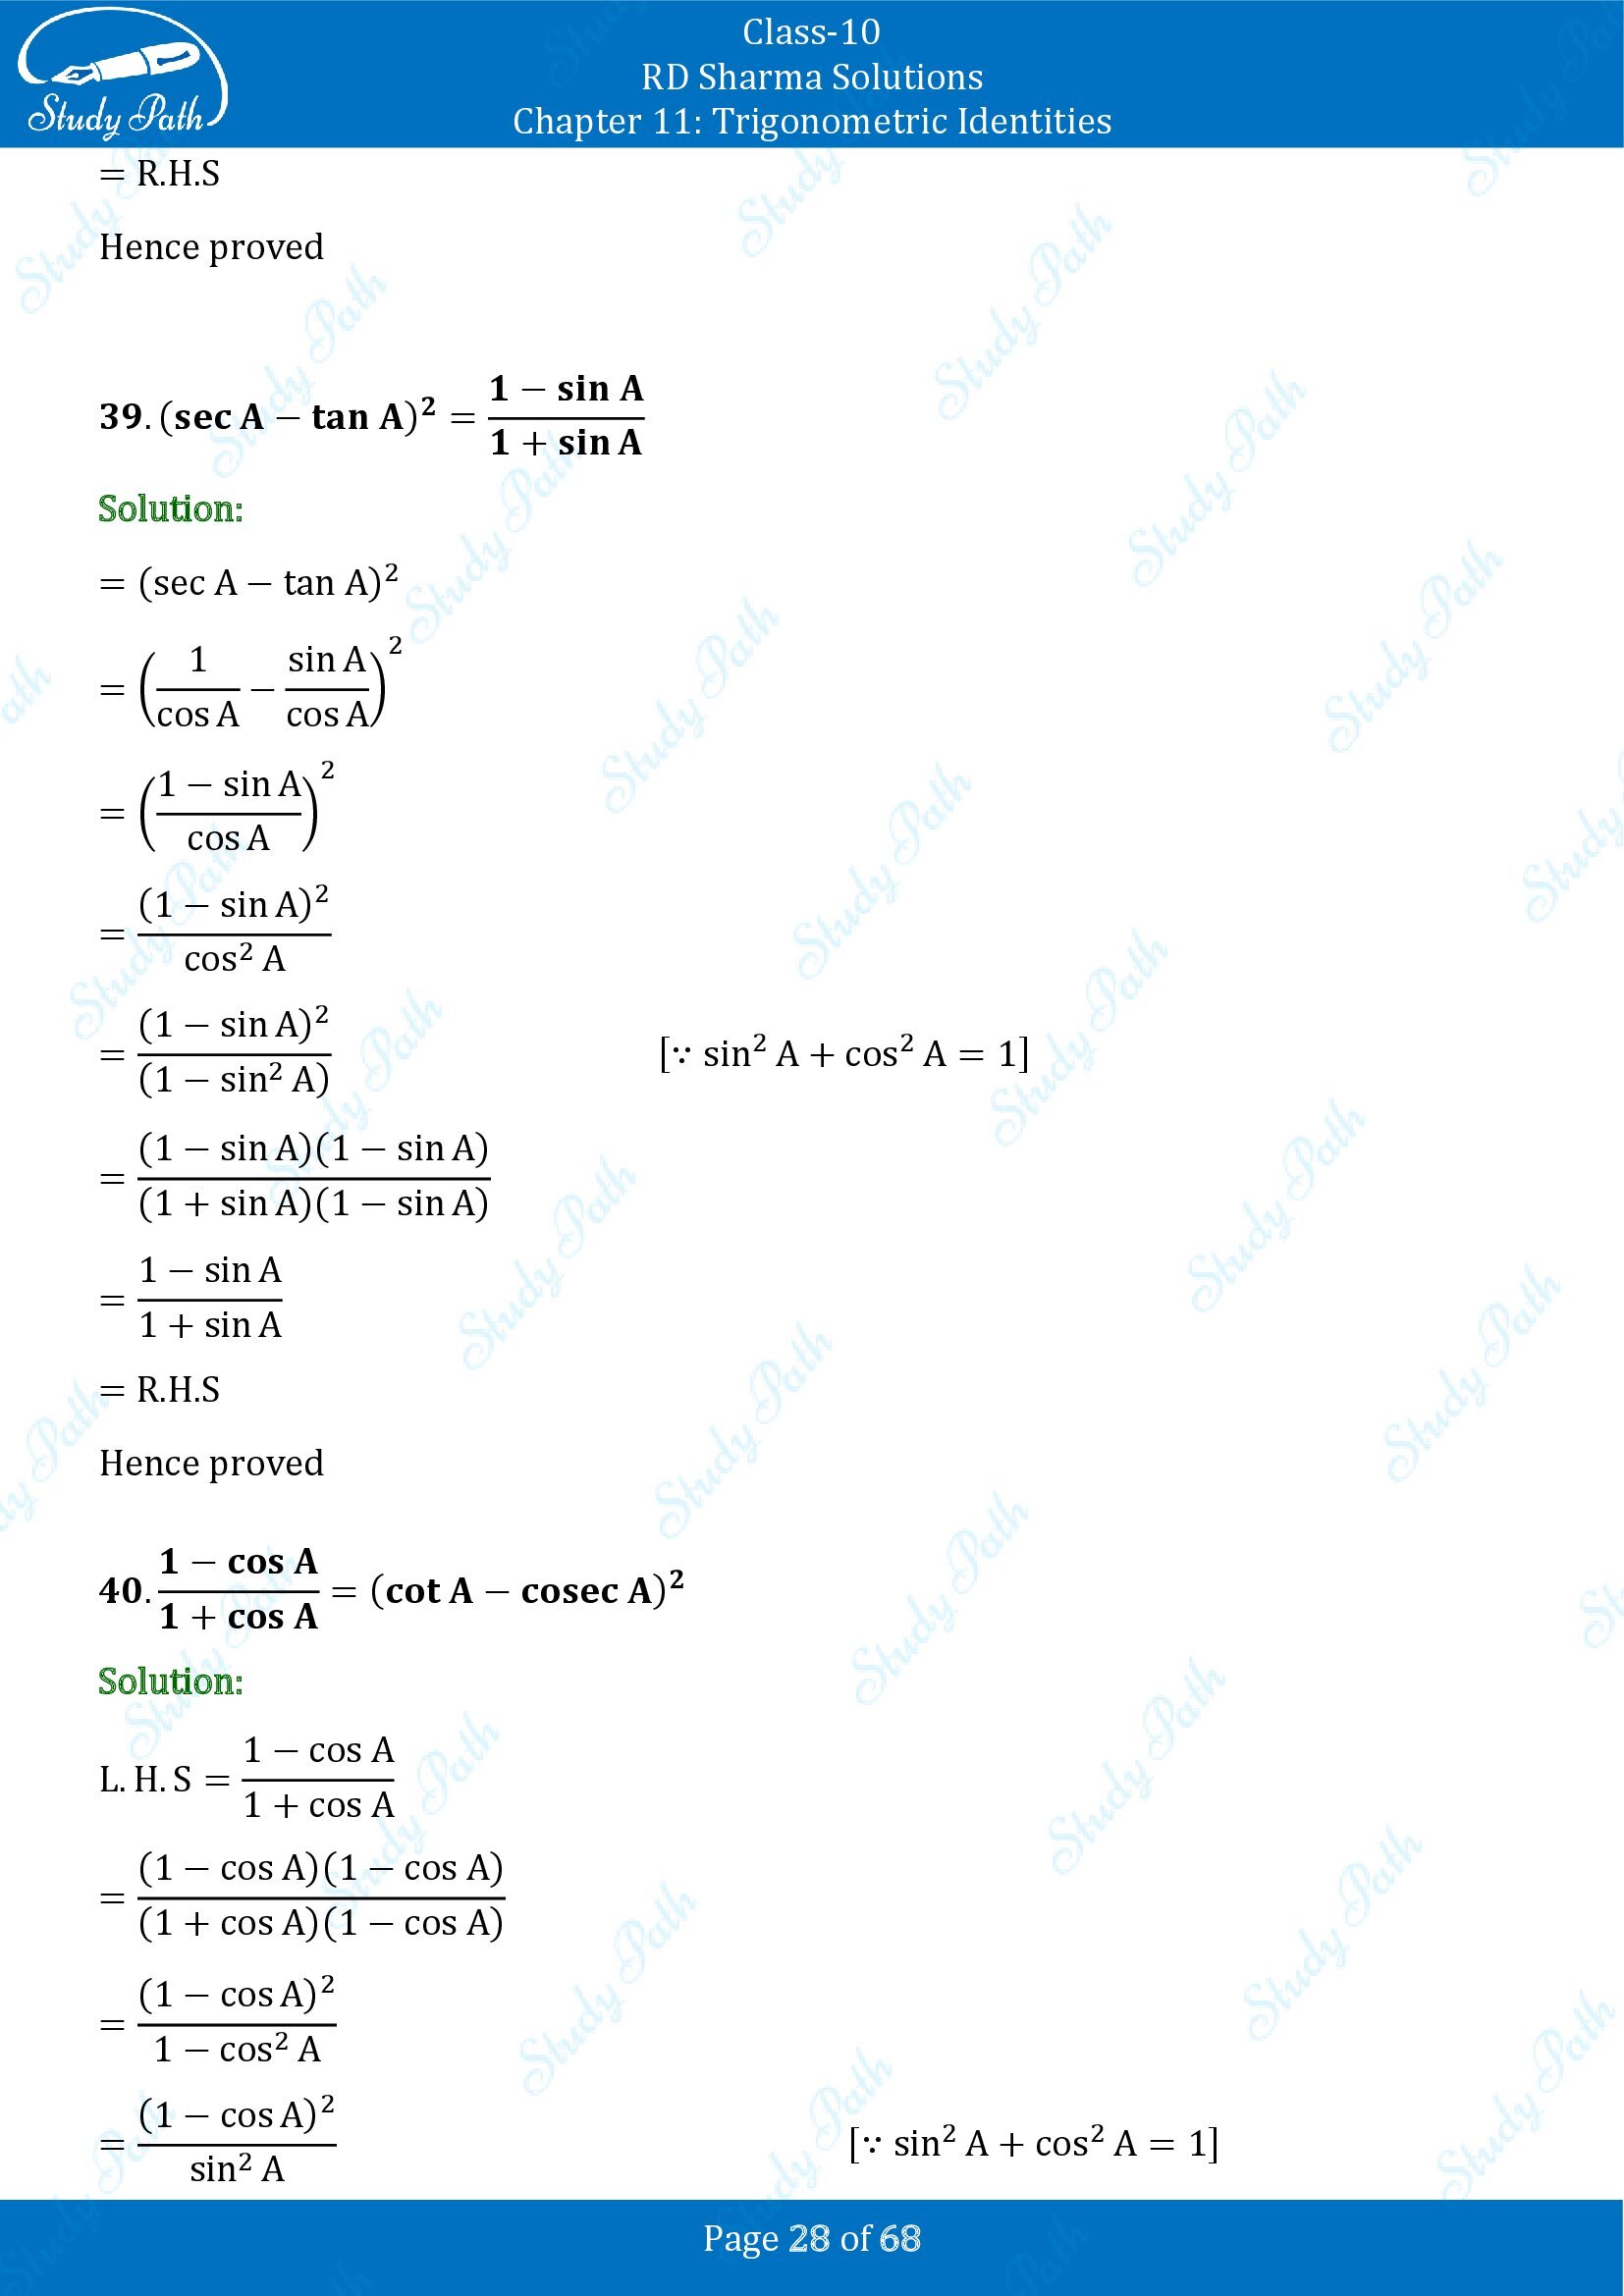 RD Sharma Solutions Class 10 Chapter 11 Trigonometric Identities Exercise 11.1 00028